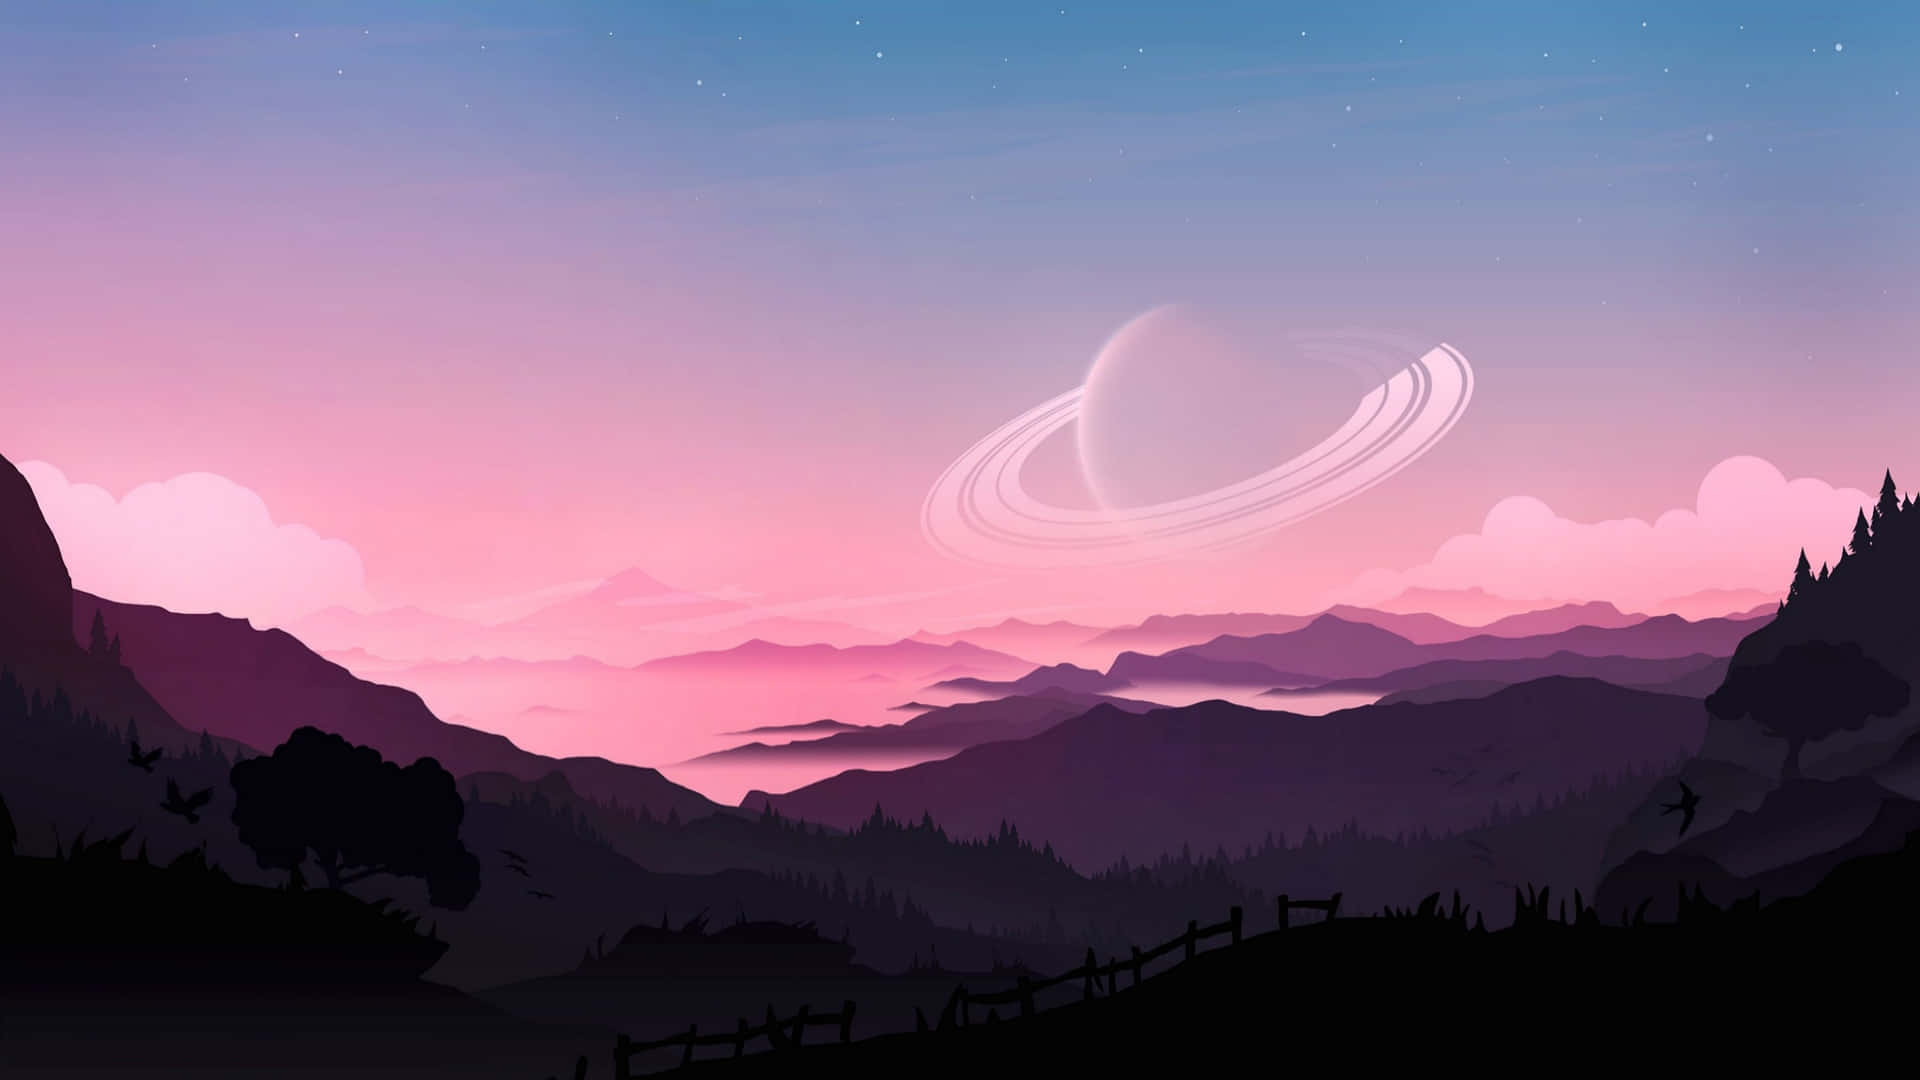 2048x1152 Aesthetic Pink Sky Mountain View Wallpaper